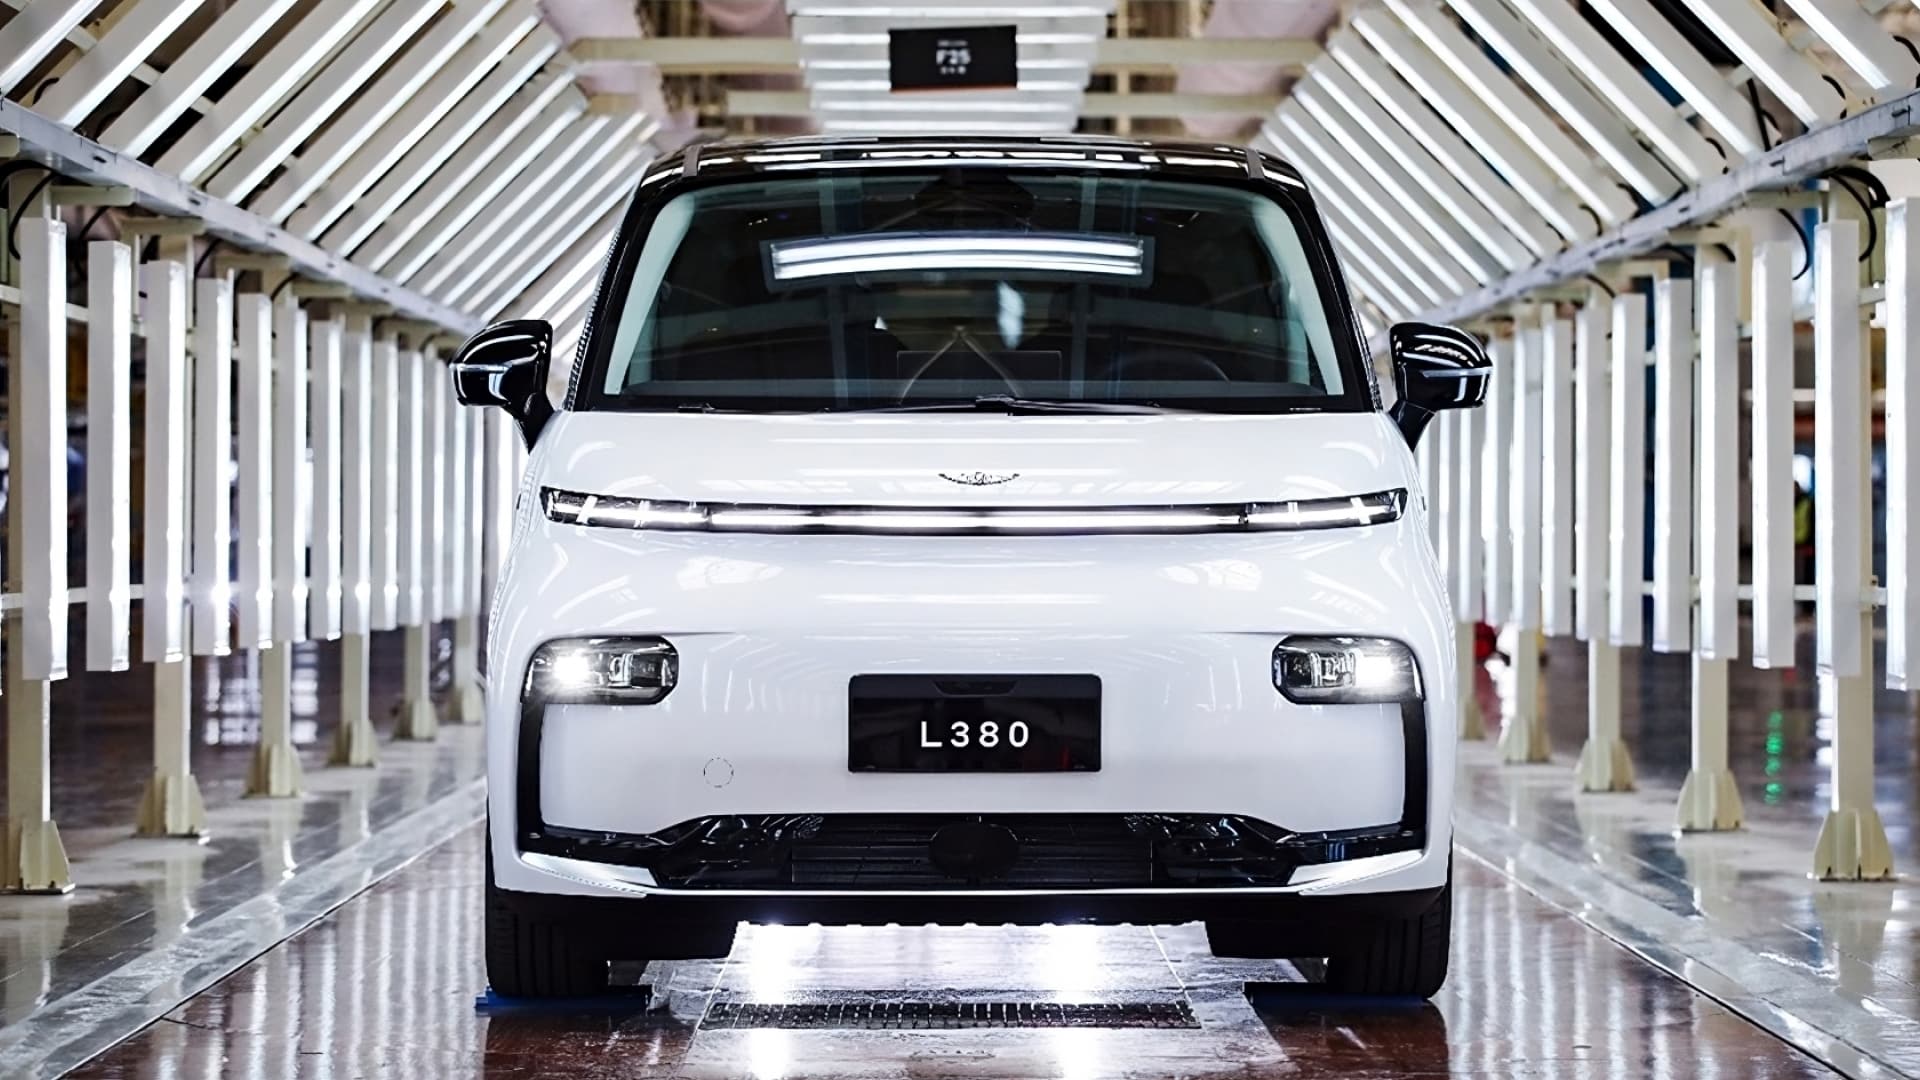 LEVC L380 minivan rolled off the assembly line in China